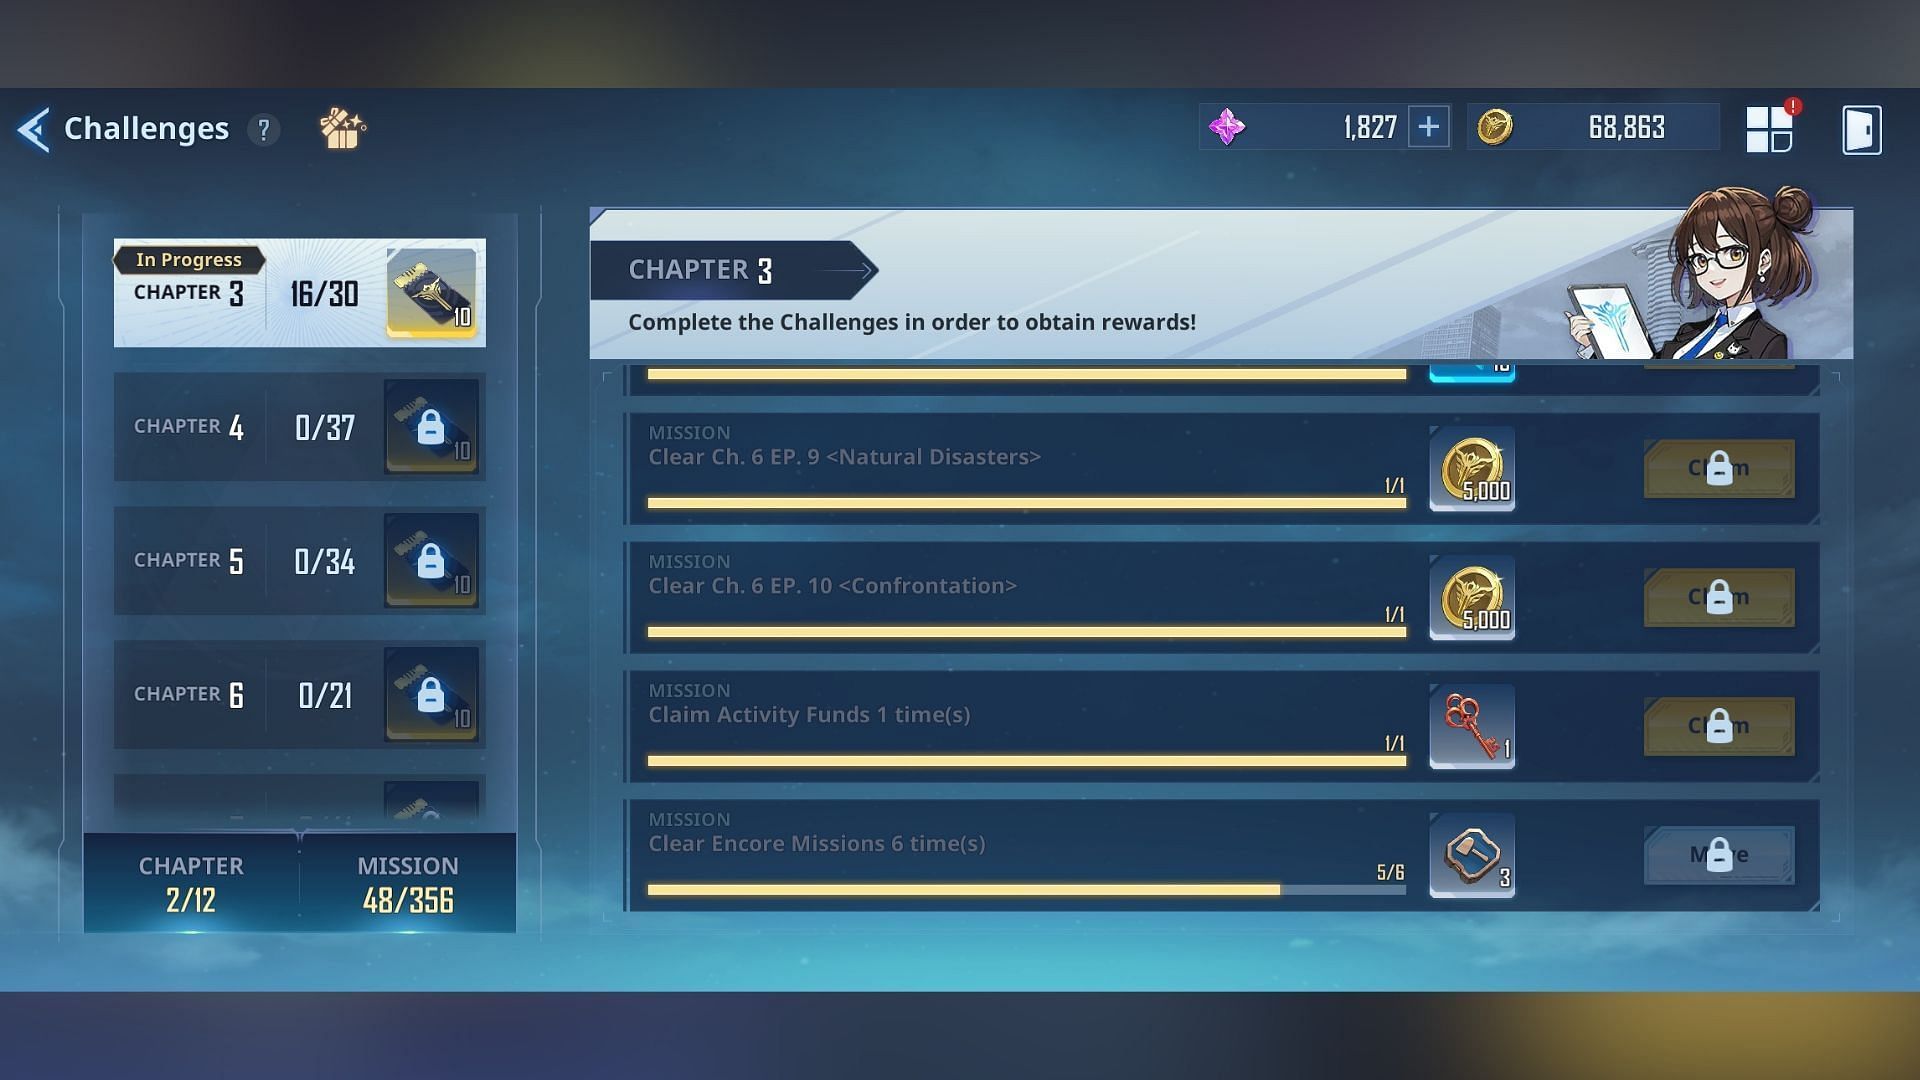 Complete tasks in the Challenges section to get Gold in Solo Leveling: Arise (Image via Netmarble)